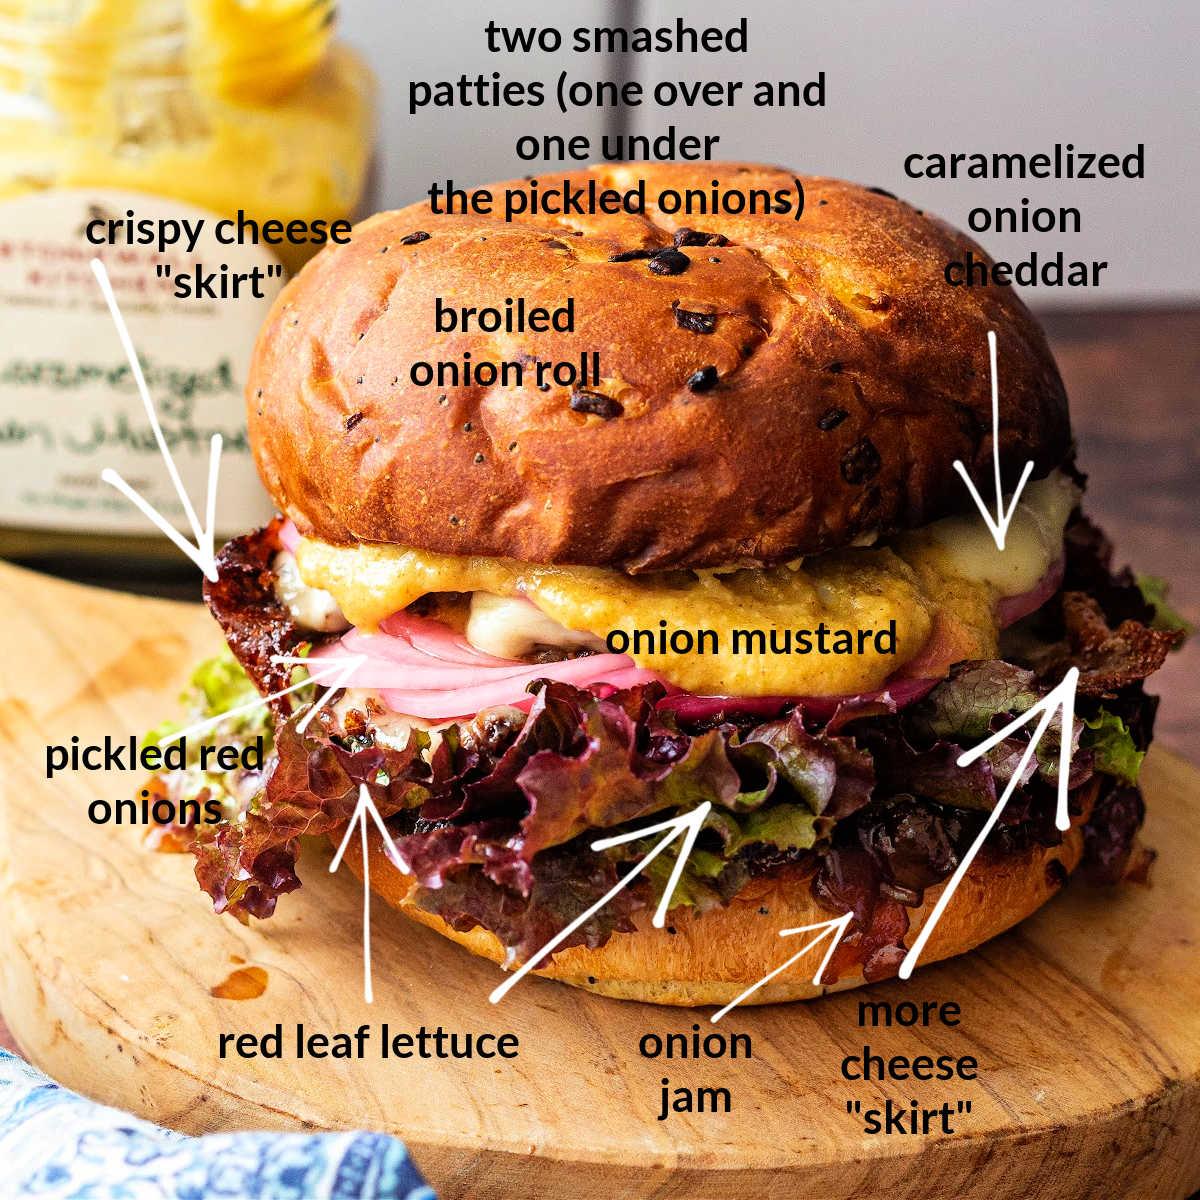 A close up of a cheeseburger with all the components labled with arrows pointing to each component.